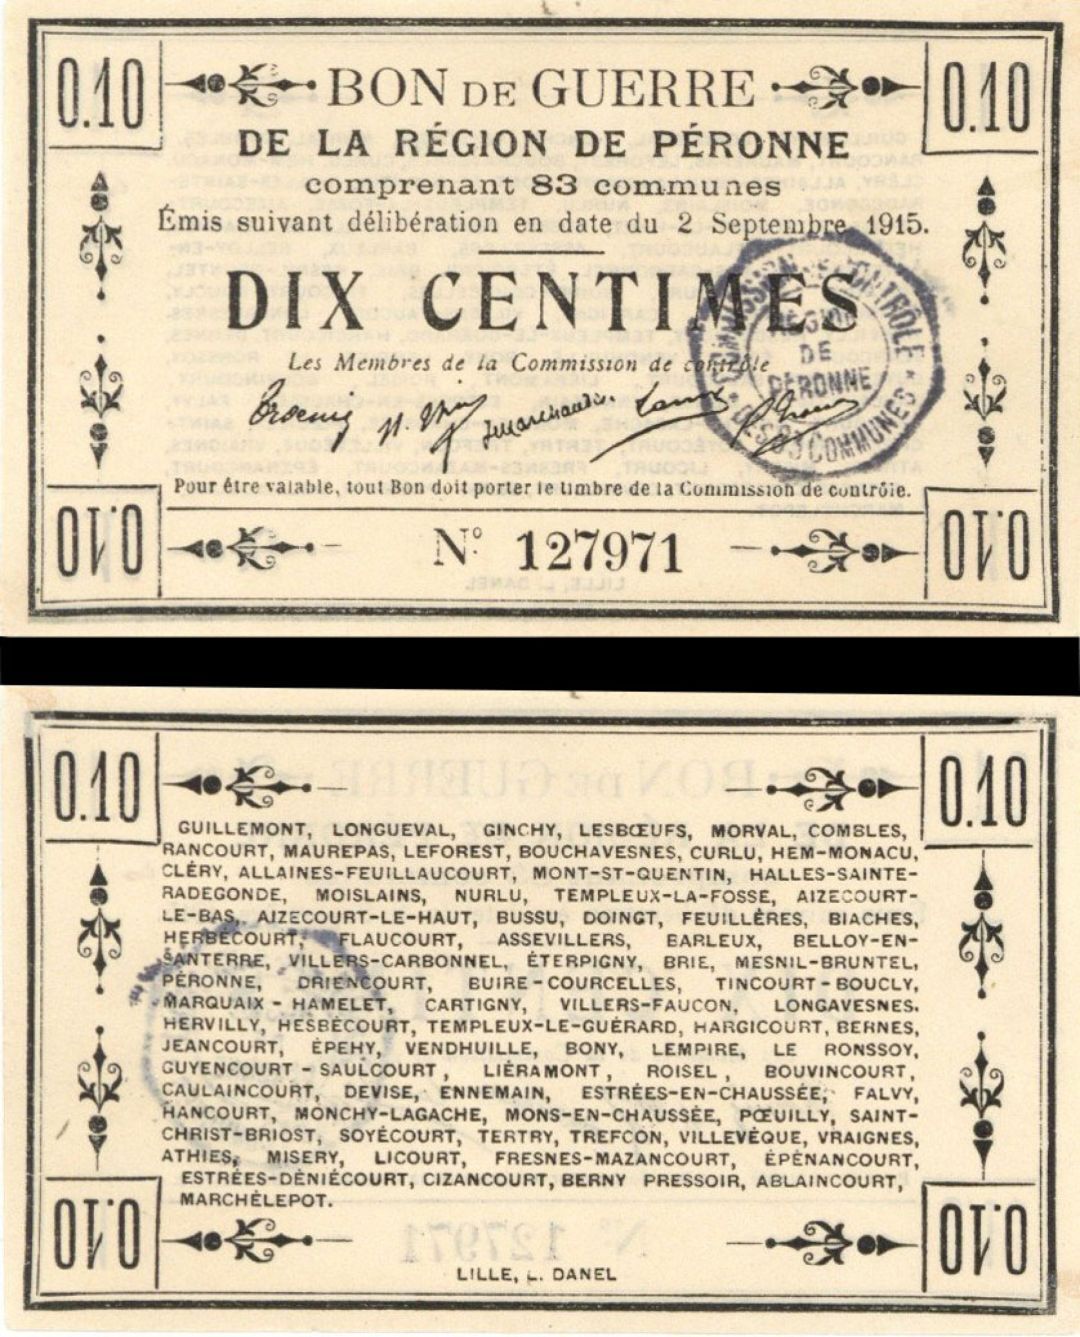 France, Notgeld - 1915, 10 Centimes - Foreign Paper Money - Paper Money - Foreig